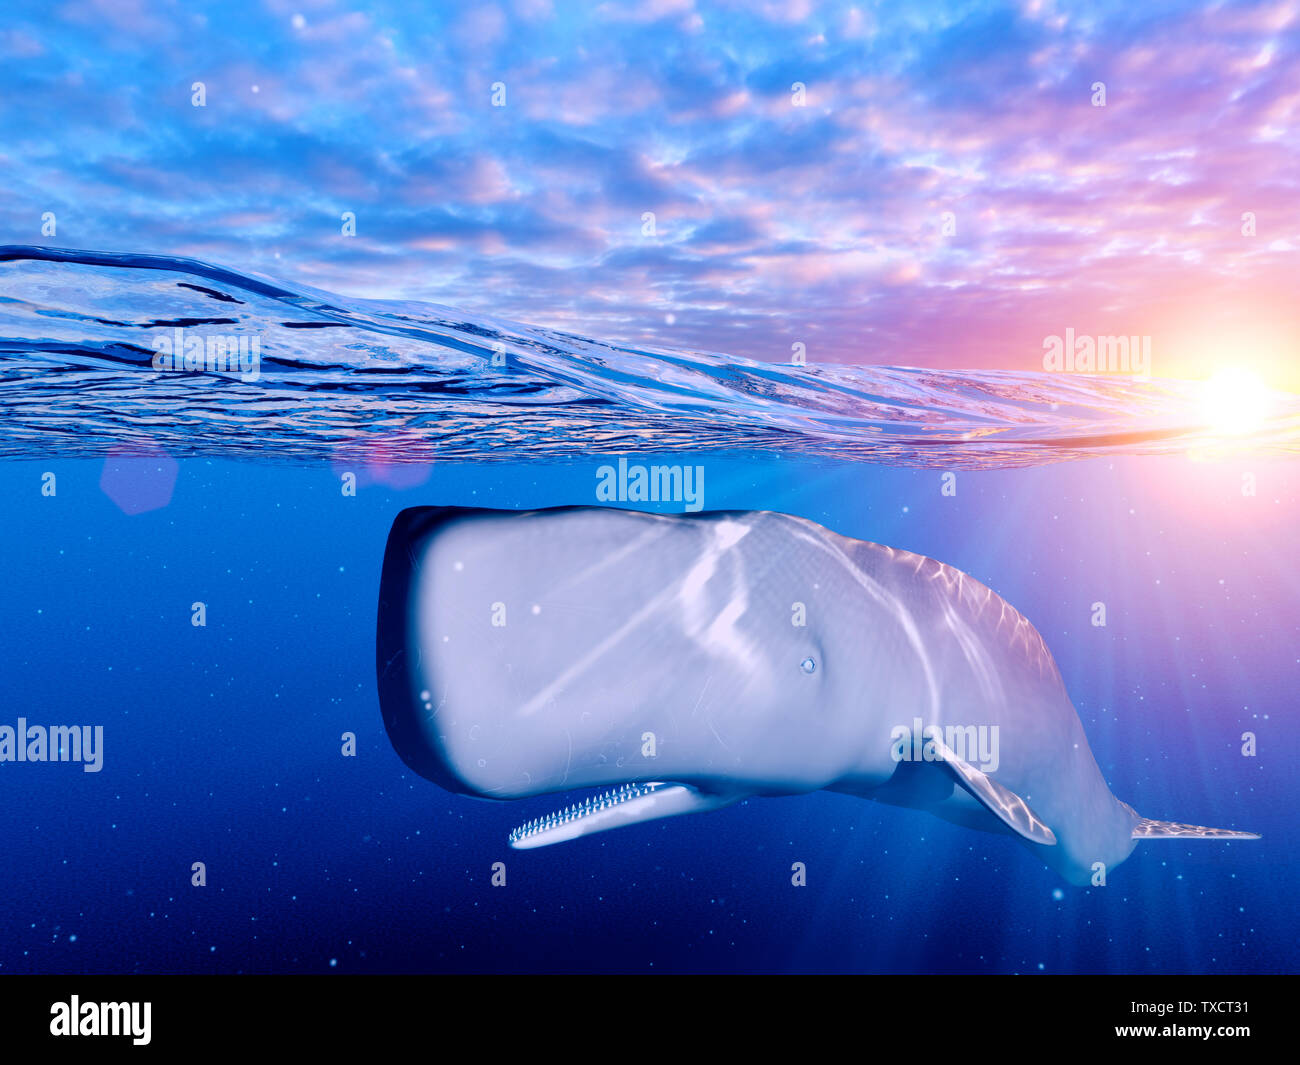 3d rendered illustration of a sperm whale Stock Photo